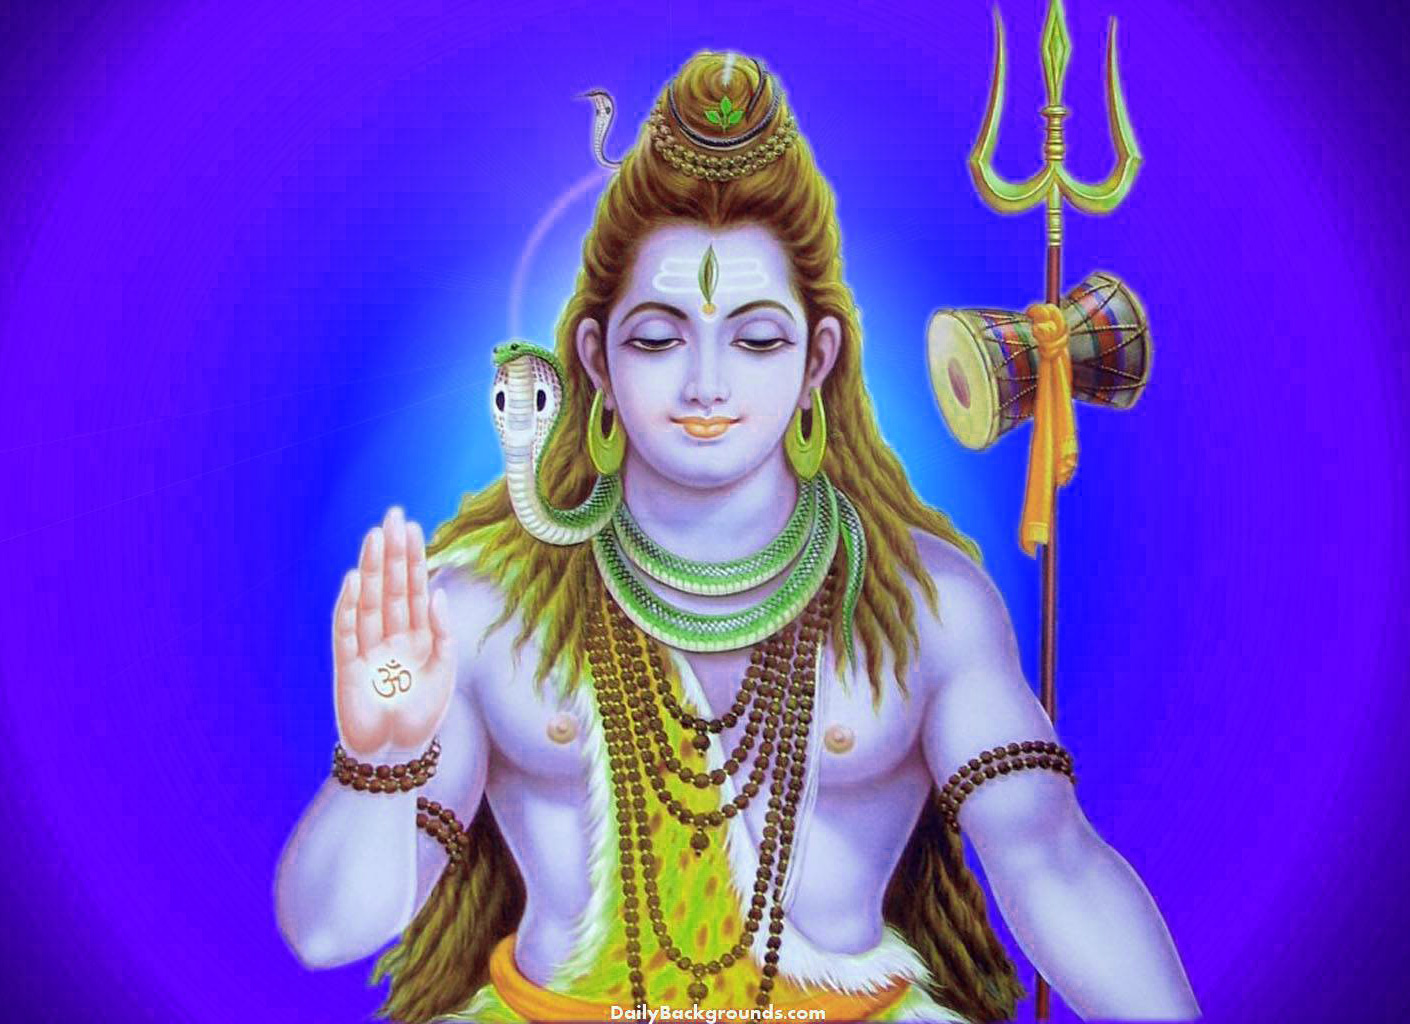 1080p Lord Shiva Images photo Download